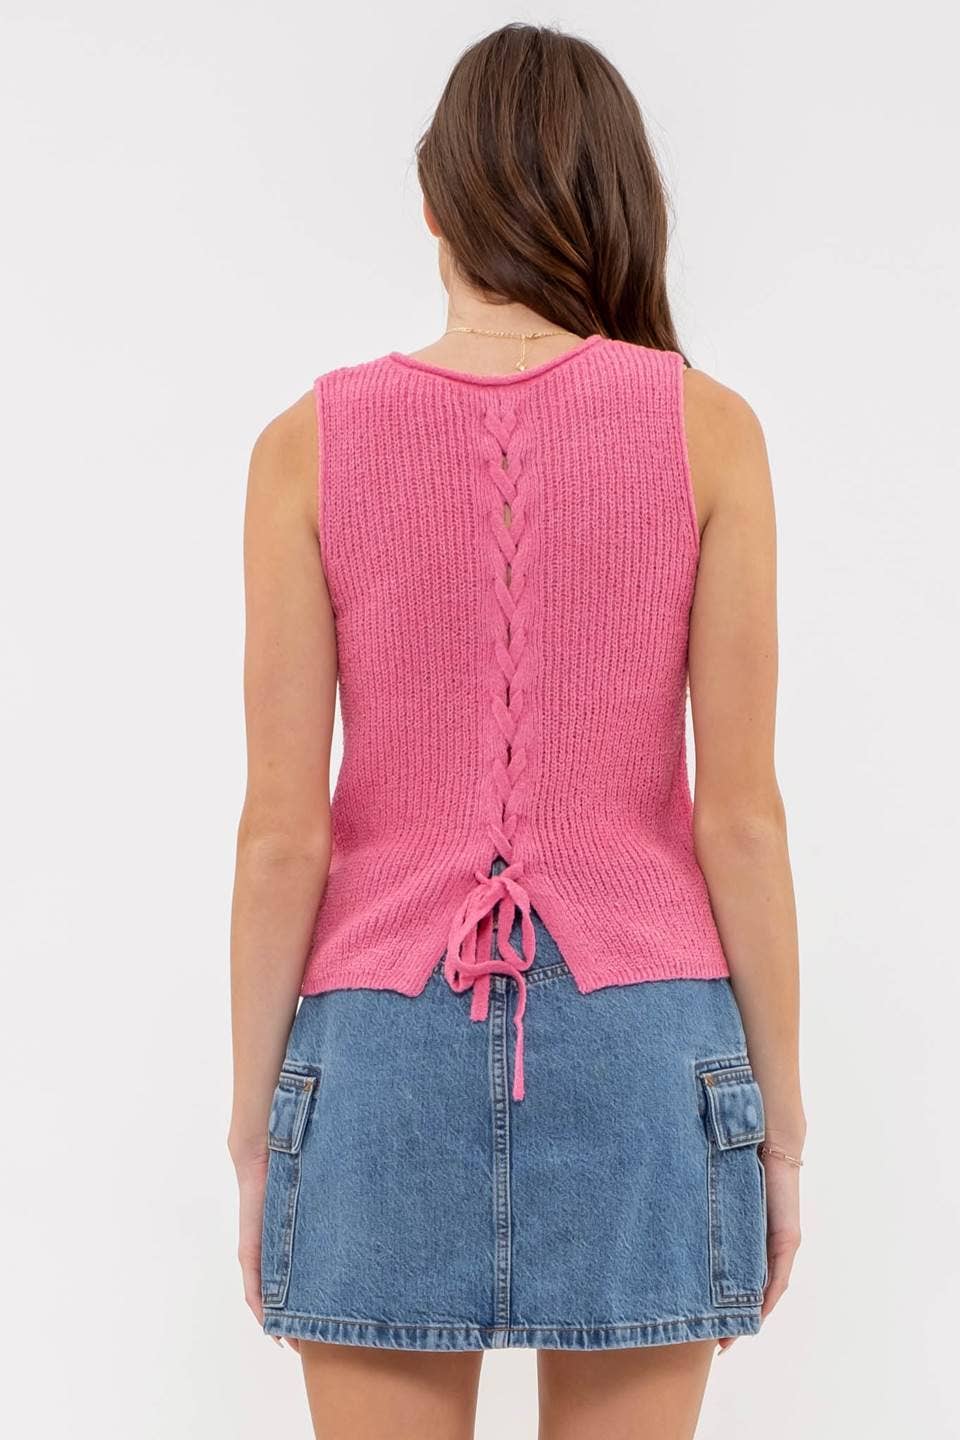 Braided Babe CROCHET SWEATER KNIT TOP